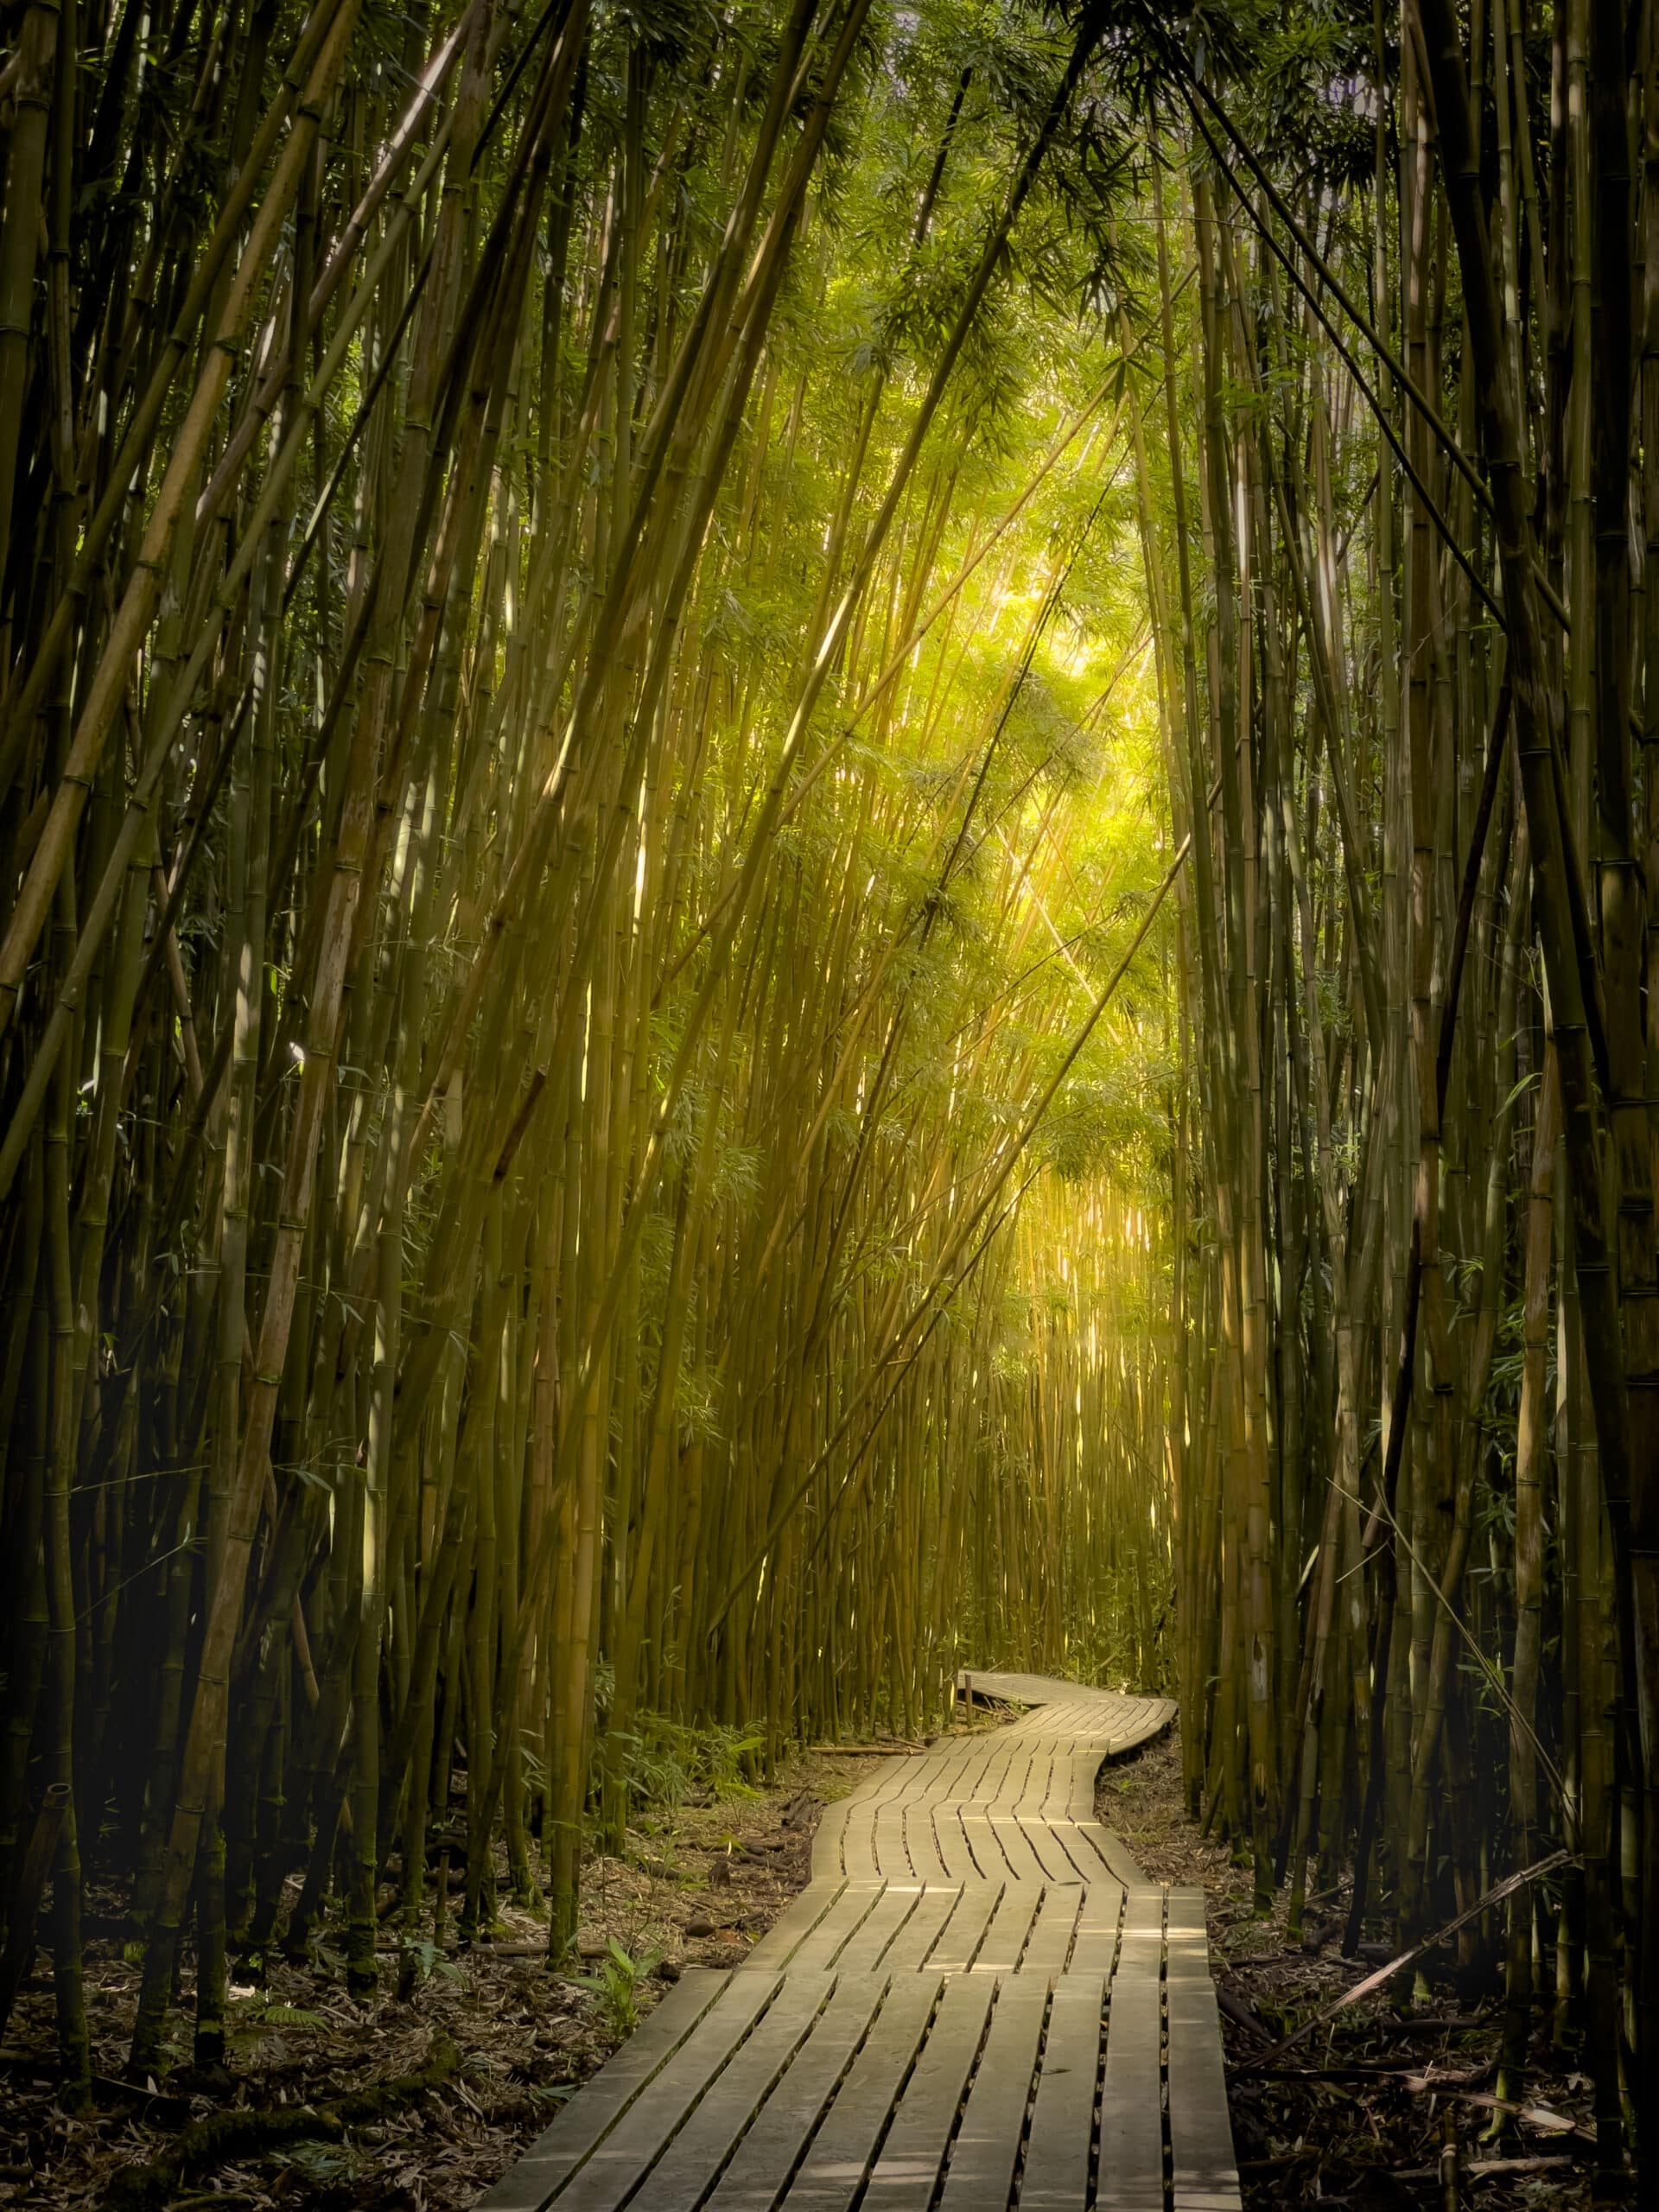 A wooden pathway leads through a bamboo forest